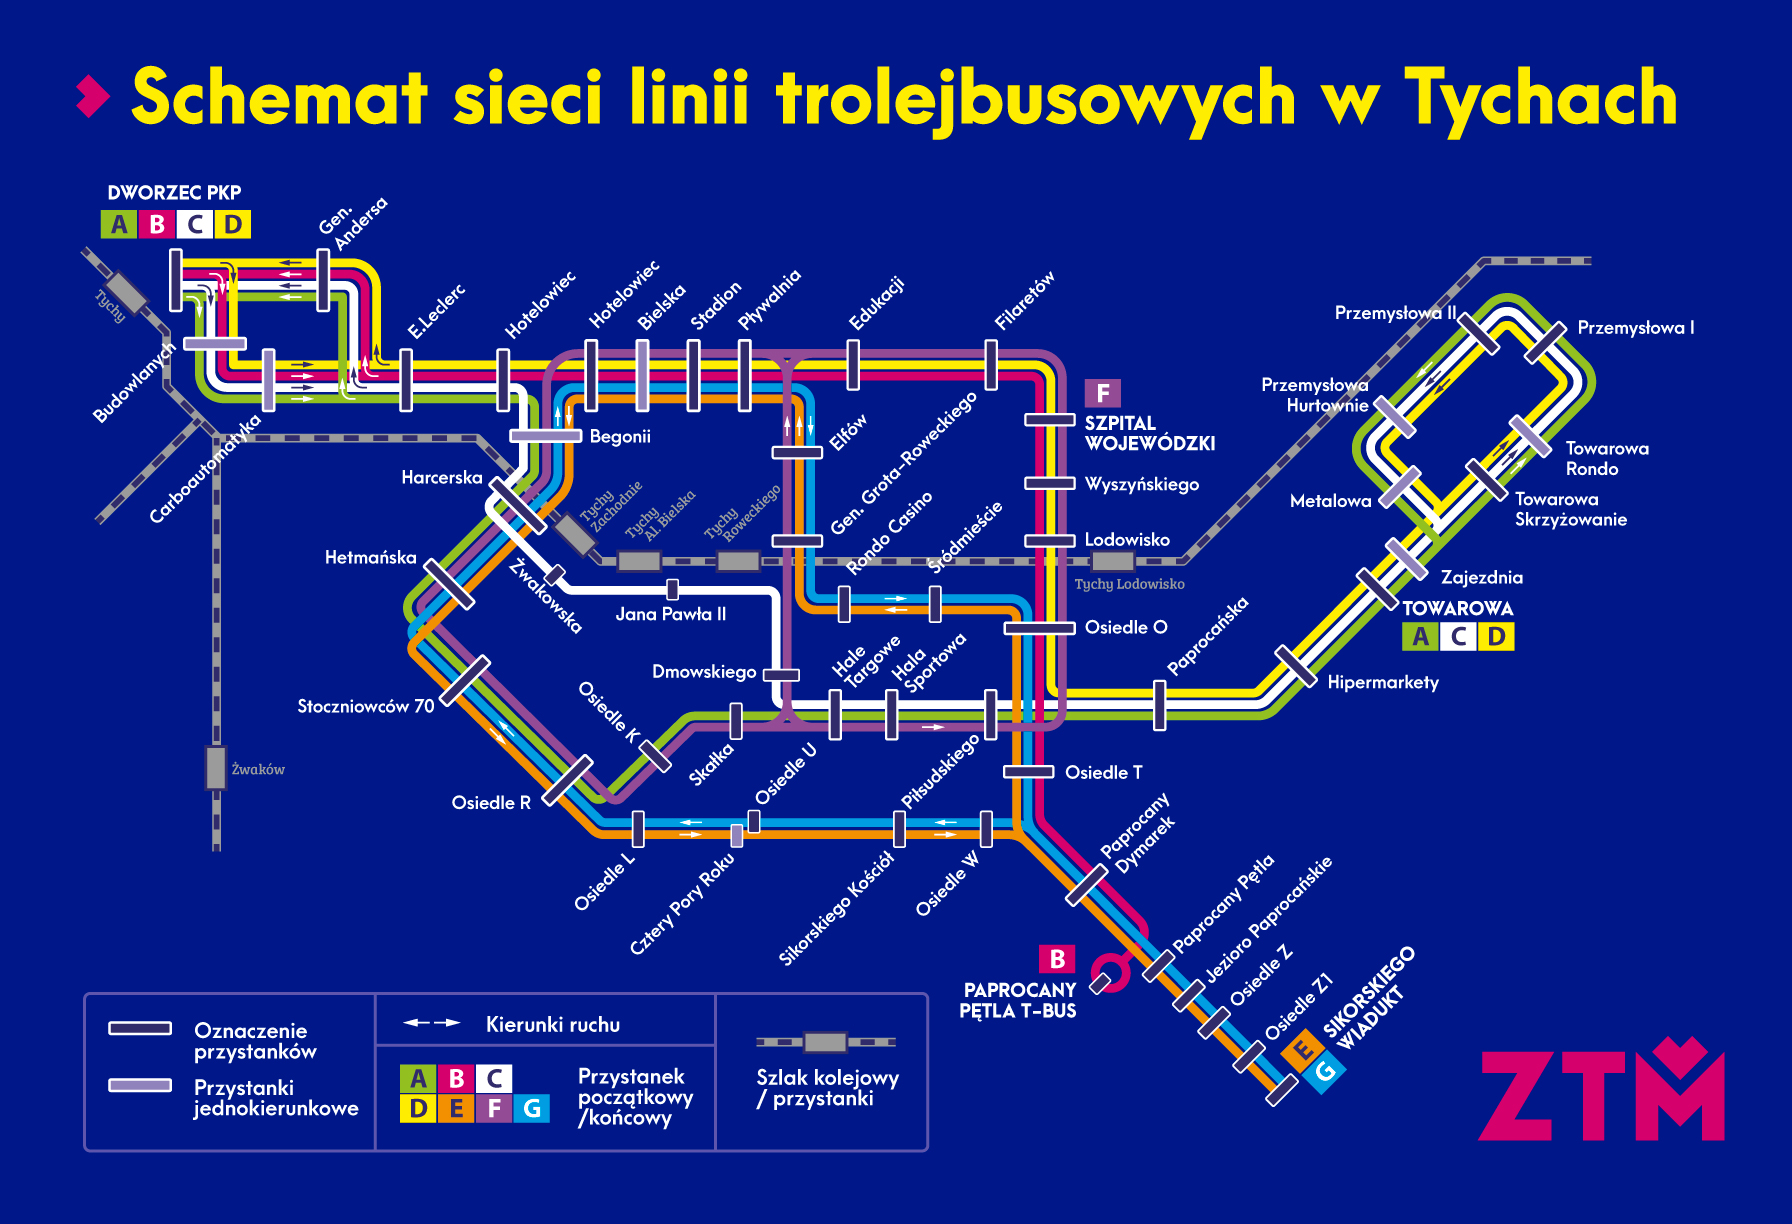 Artwork of the article We are enriching the trolleybus network in Tychy